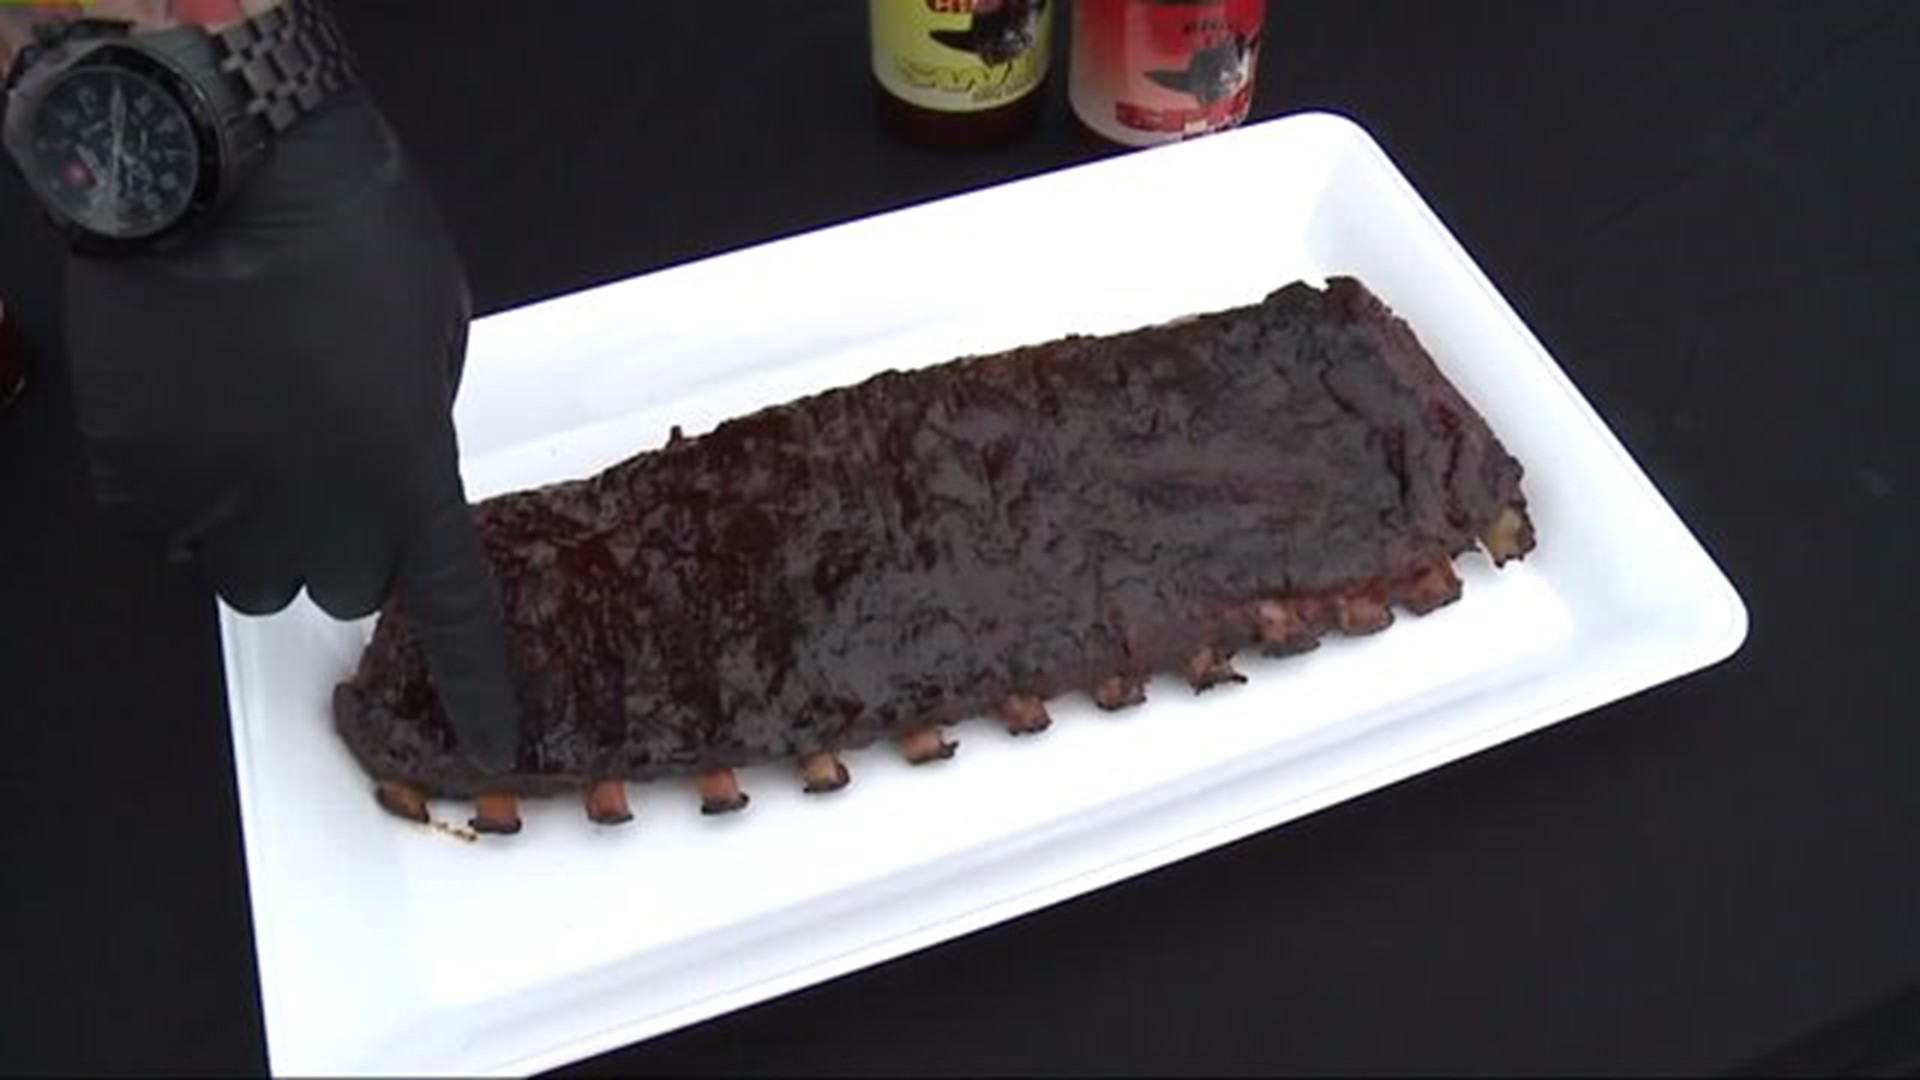 Big Chippers BBQ gets cooking, shows off rib preparation